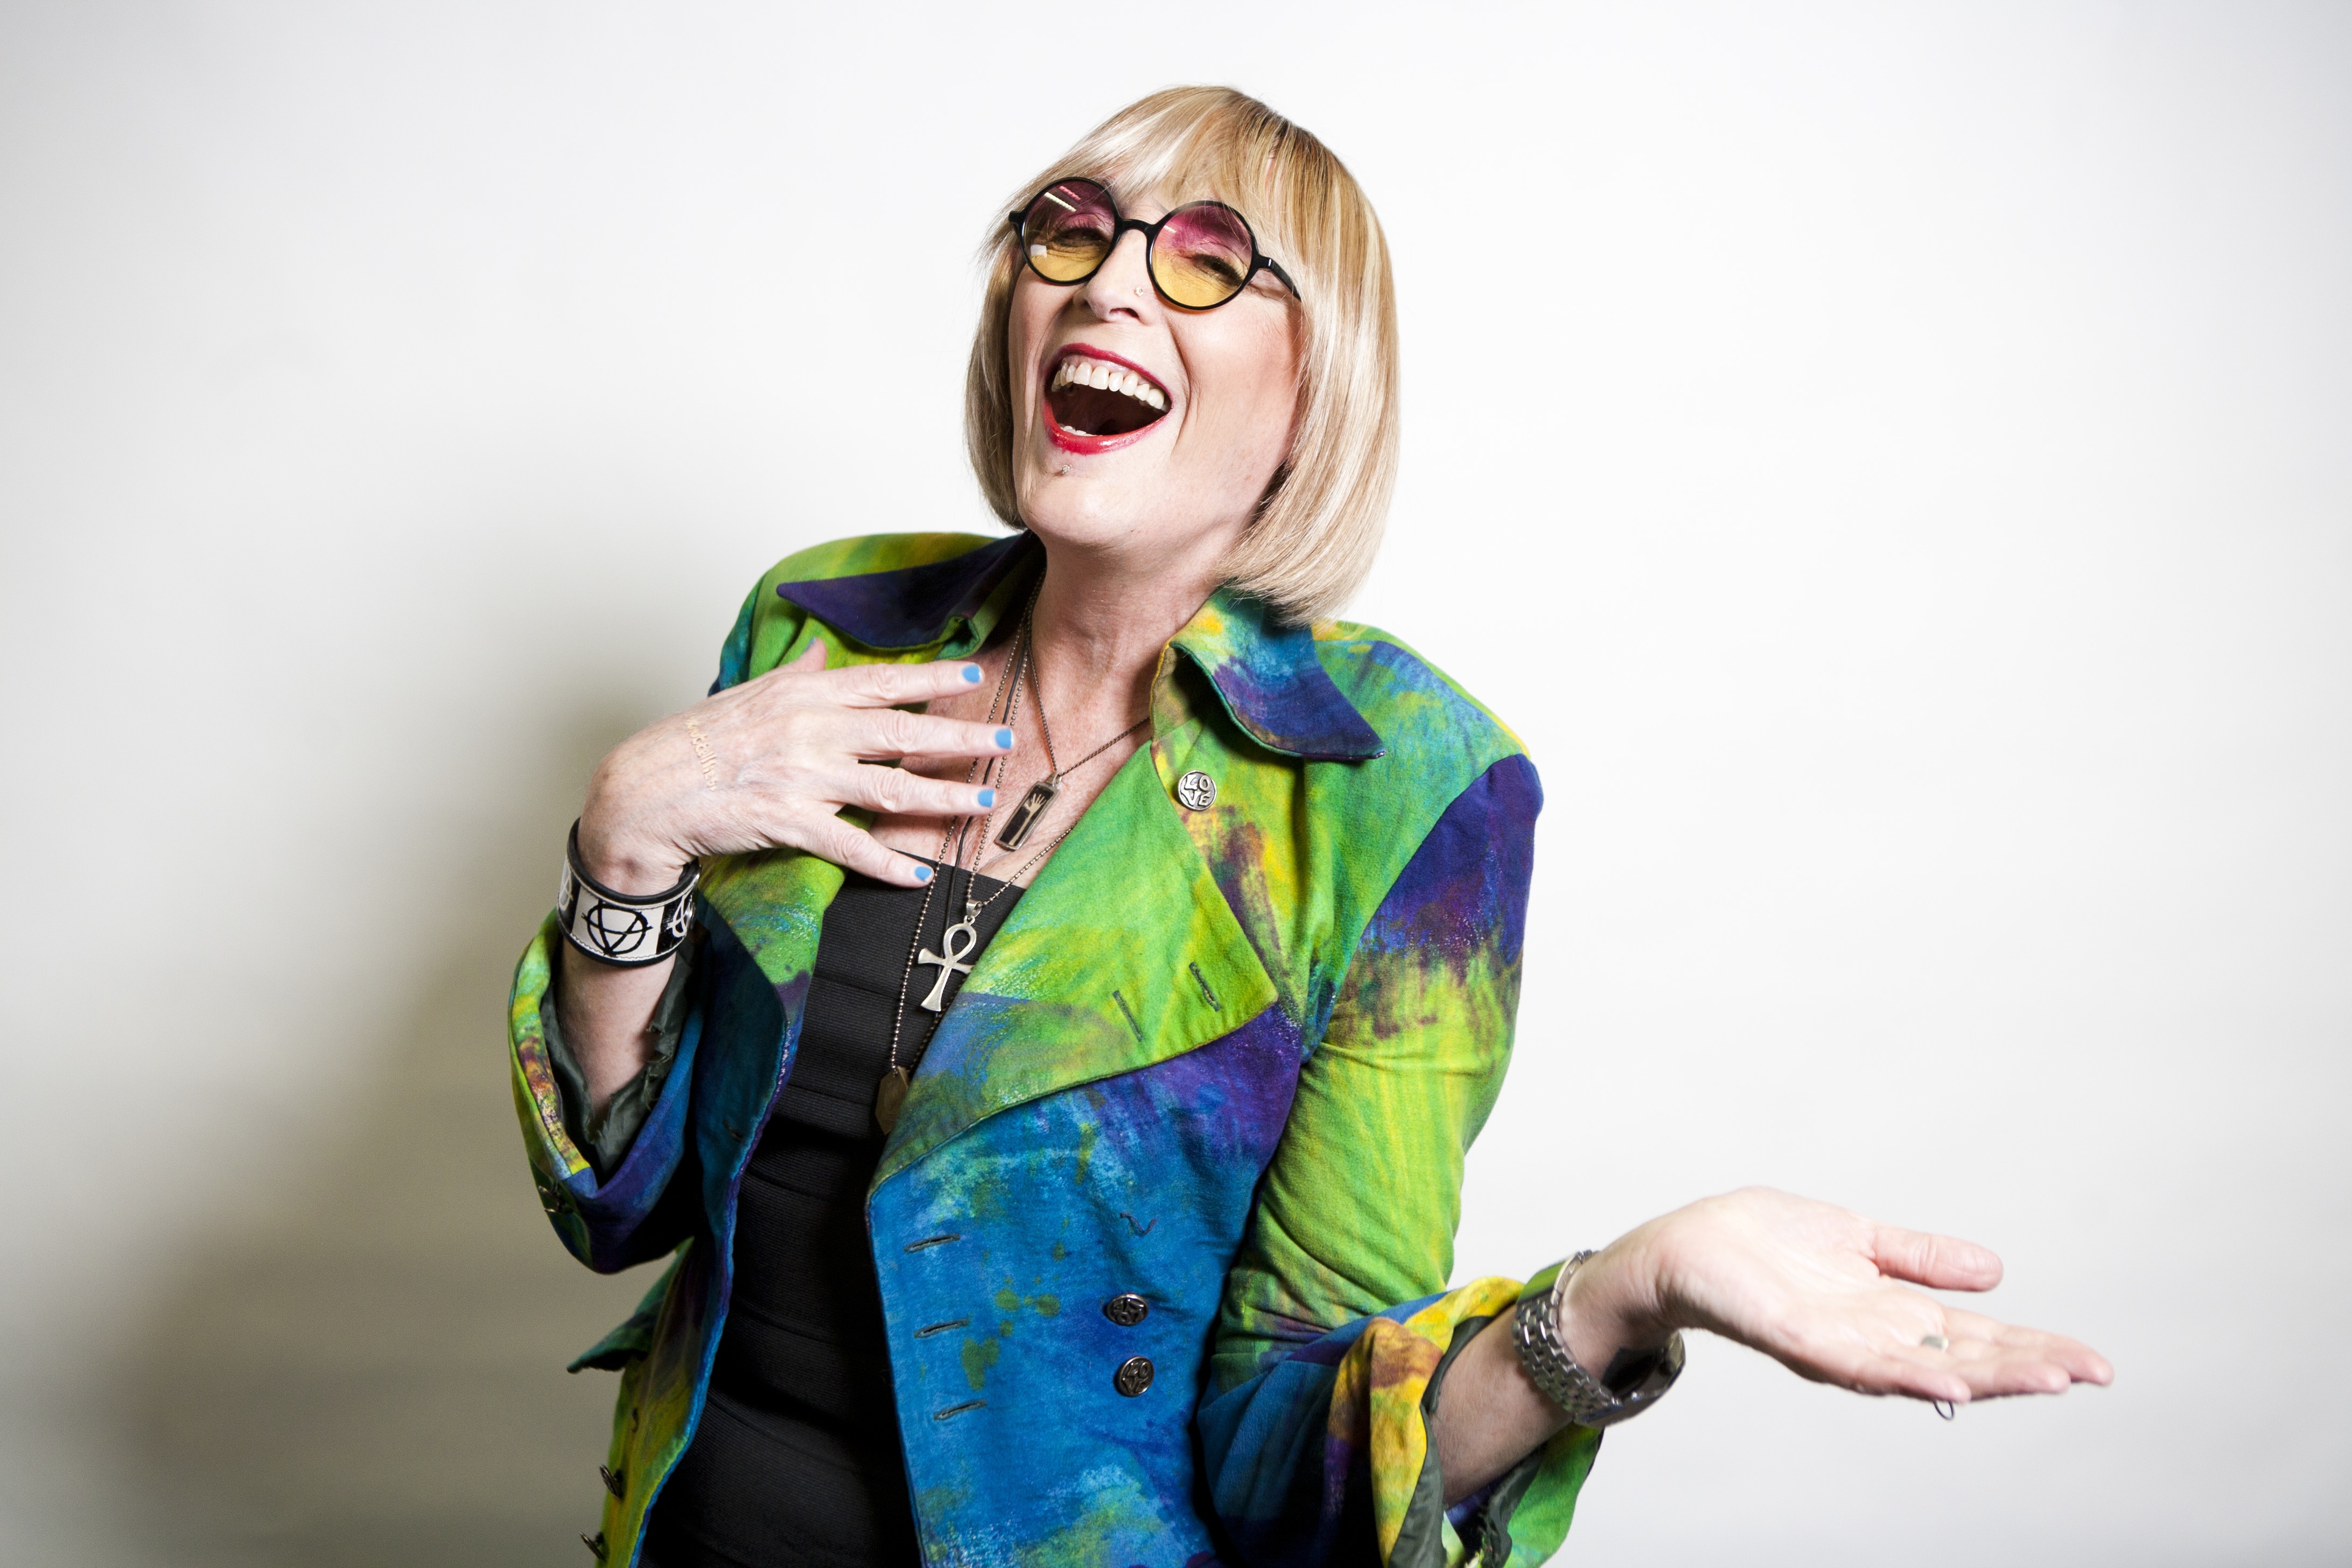 Trans trailblazer Kate Bornstein will host a Zoom session for the UNL community on Wednesday, September 16, 2020 at 7:30 p.m. via Zoom.